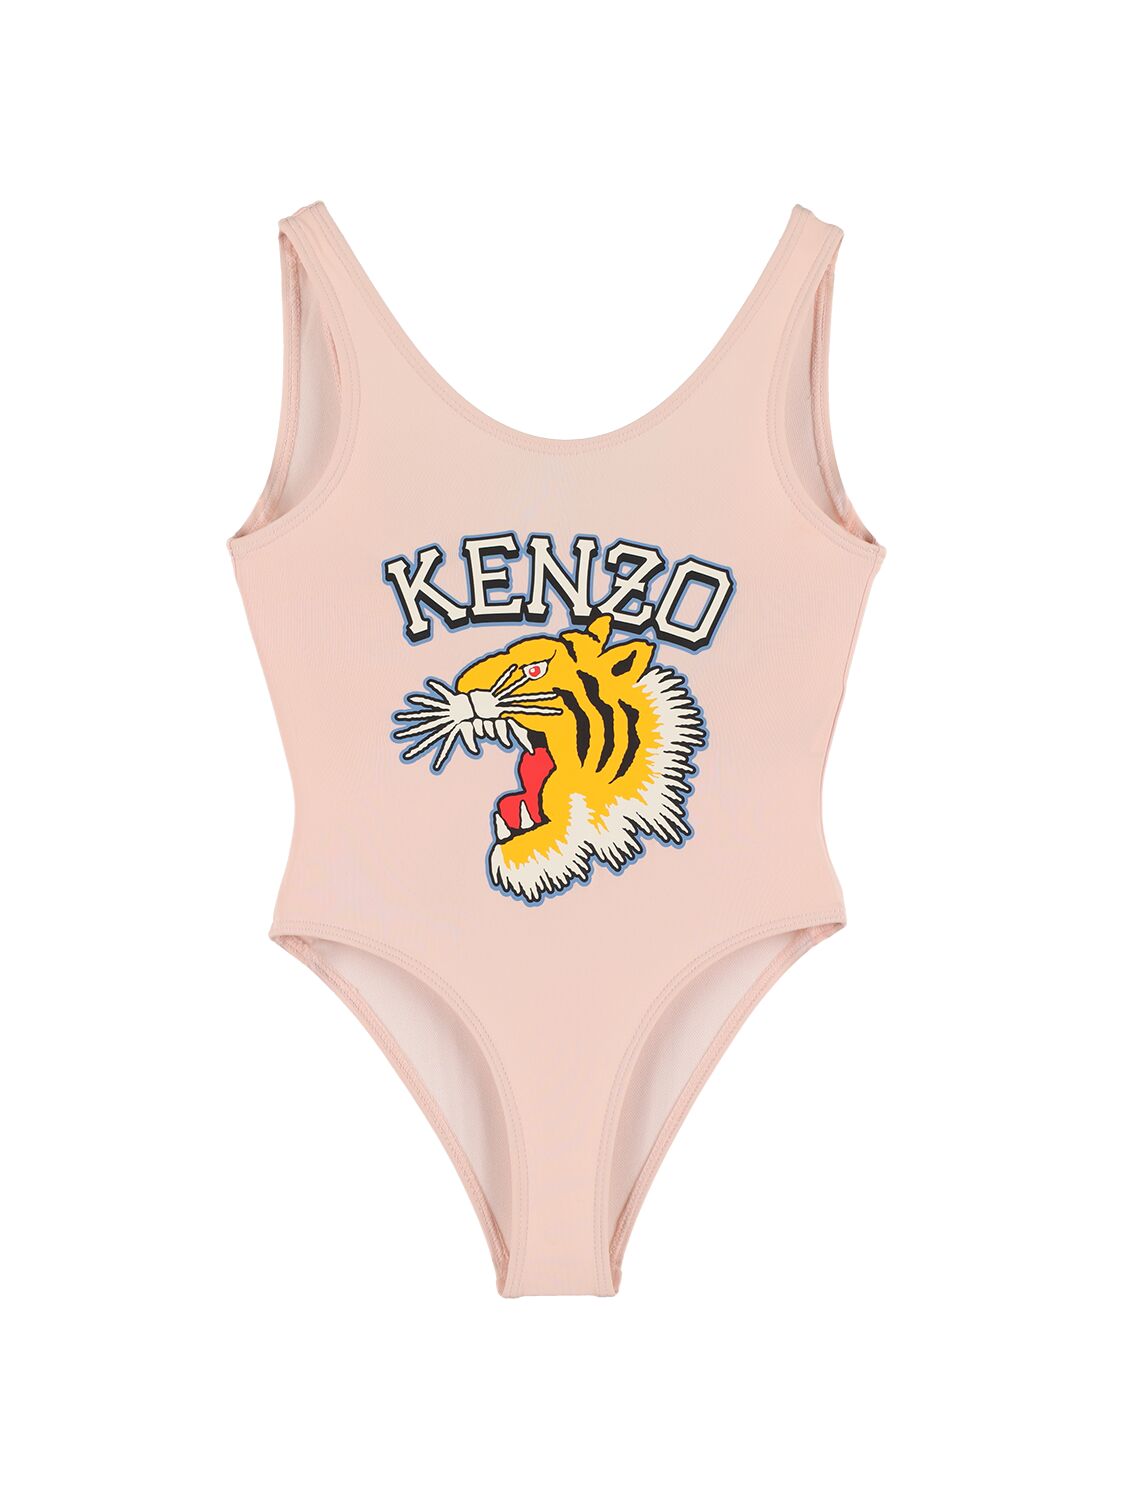 Kenzo Kids' Printed One Piece Swimsuit In 핑크